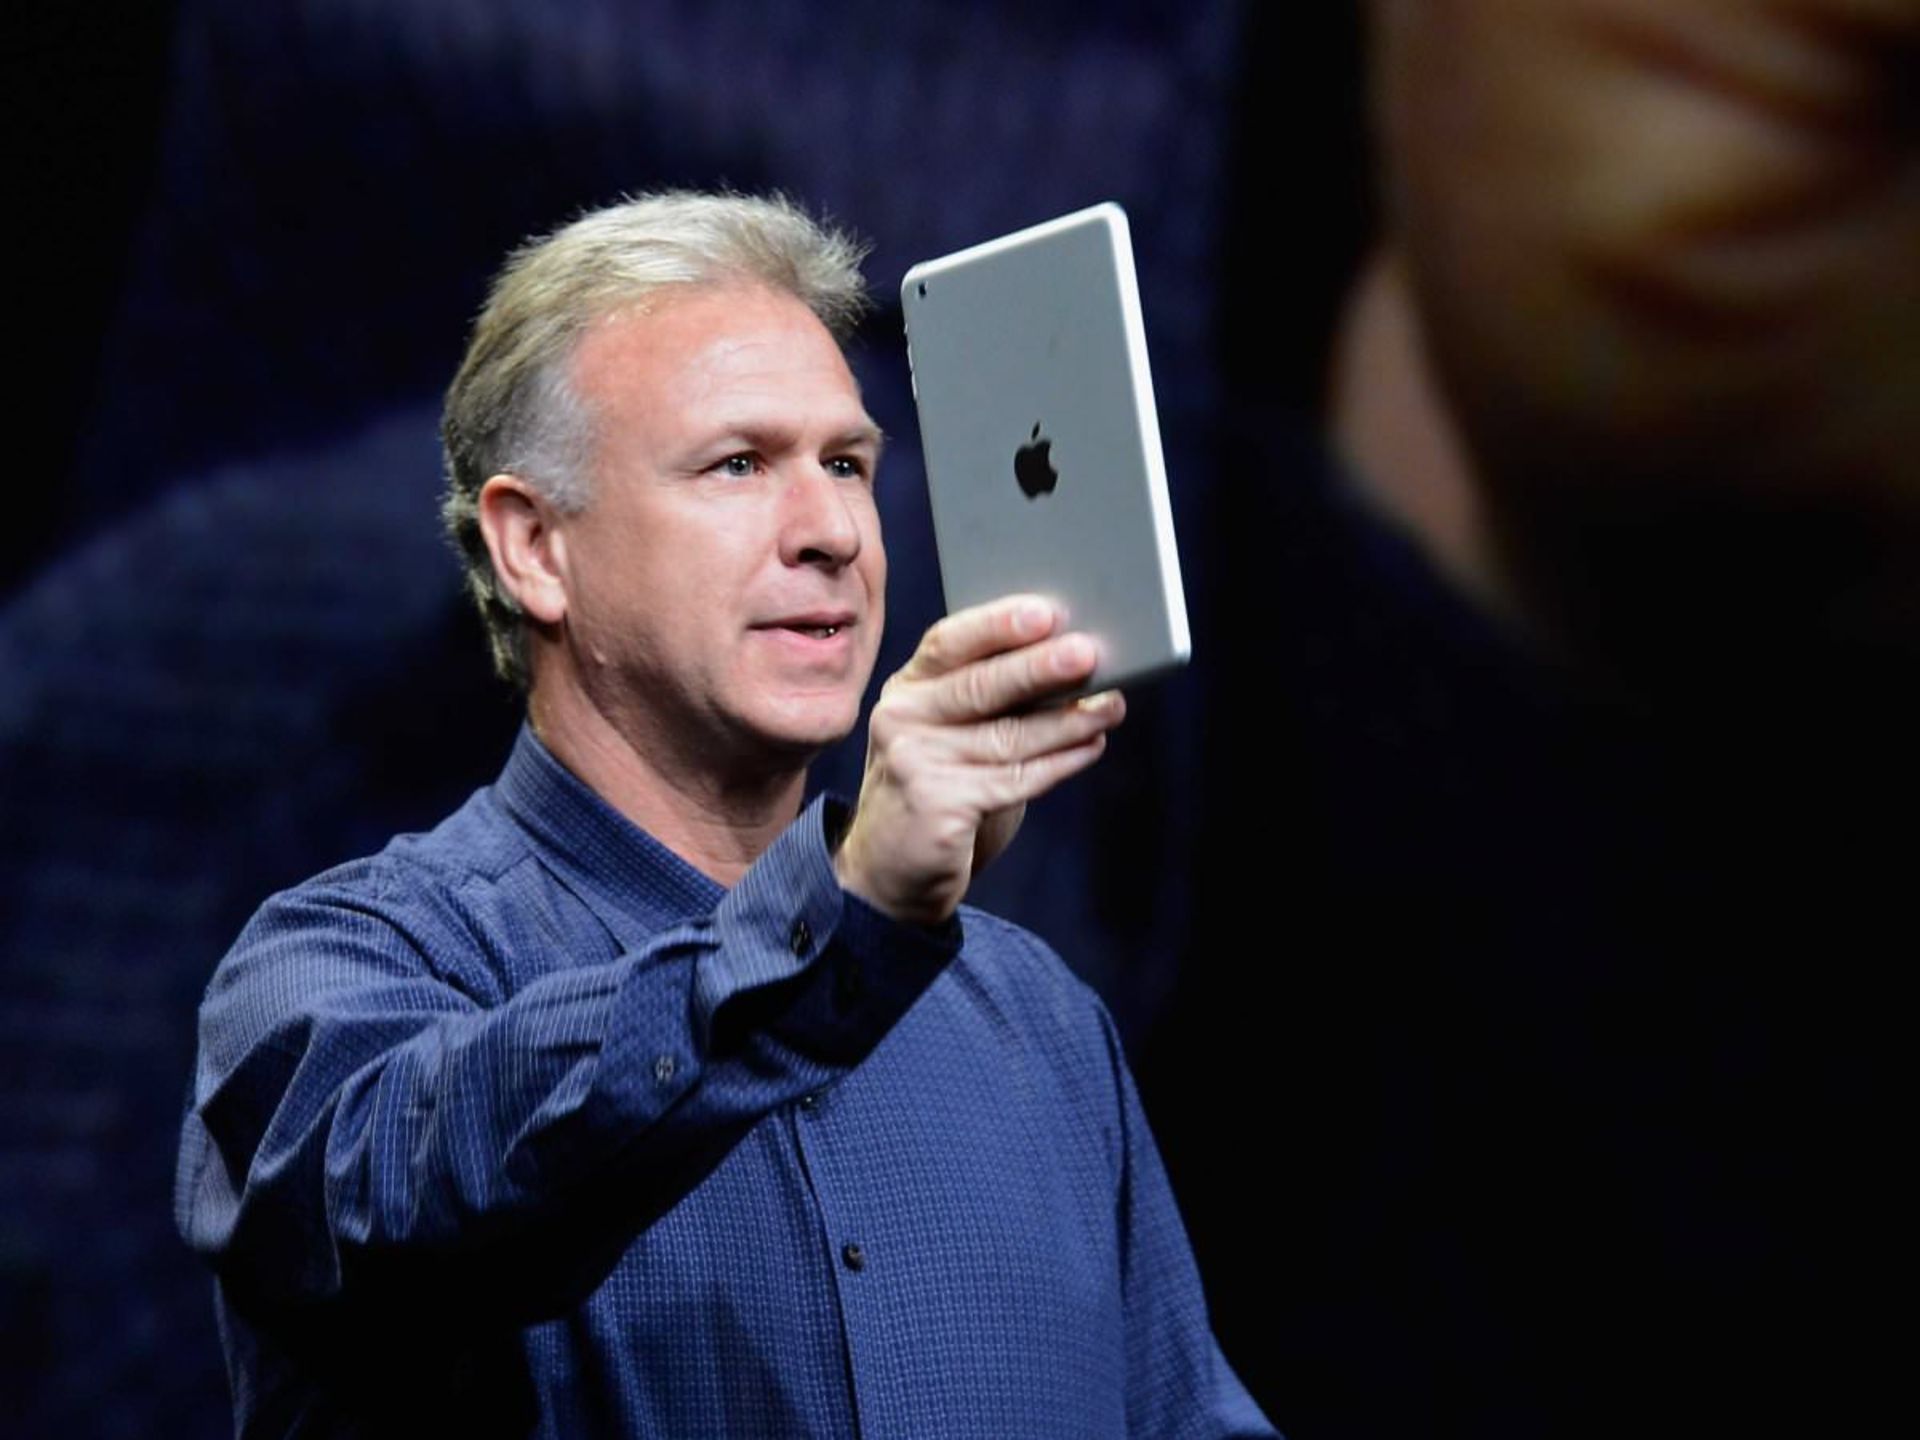 ipad-mini-with-a-retina-display-should-be-out-next-spring